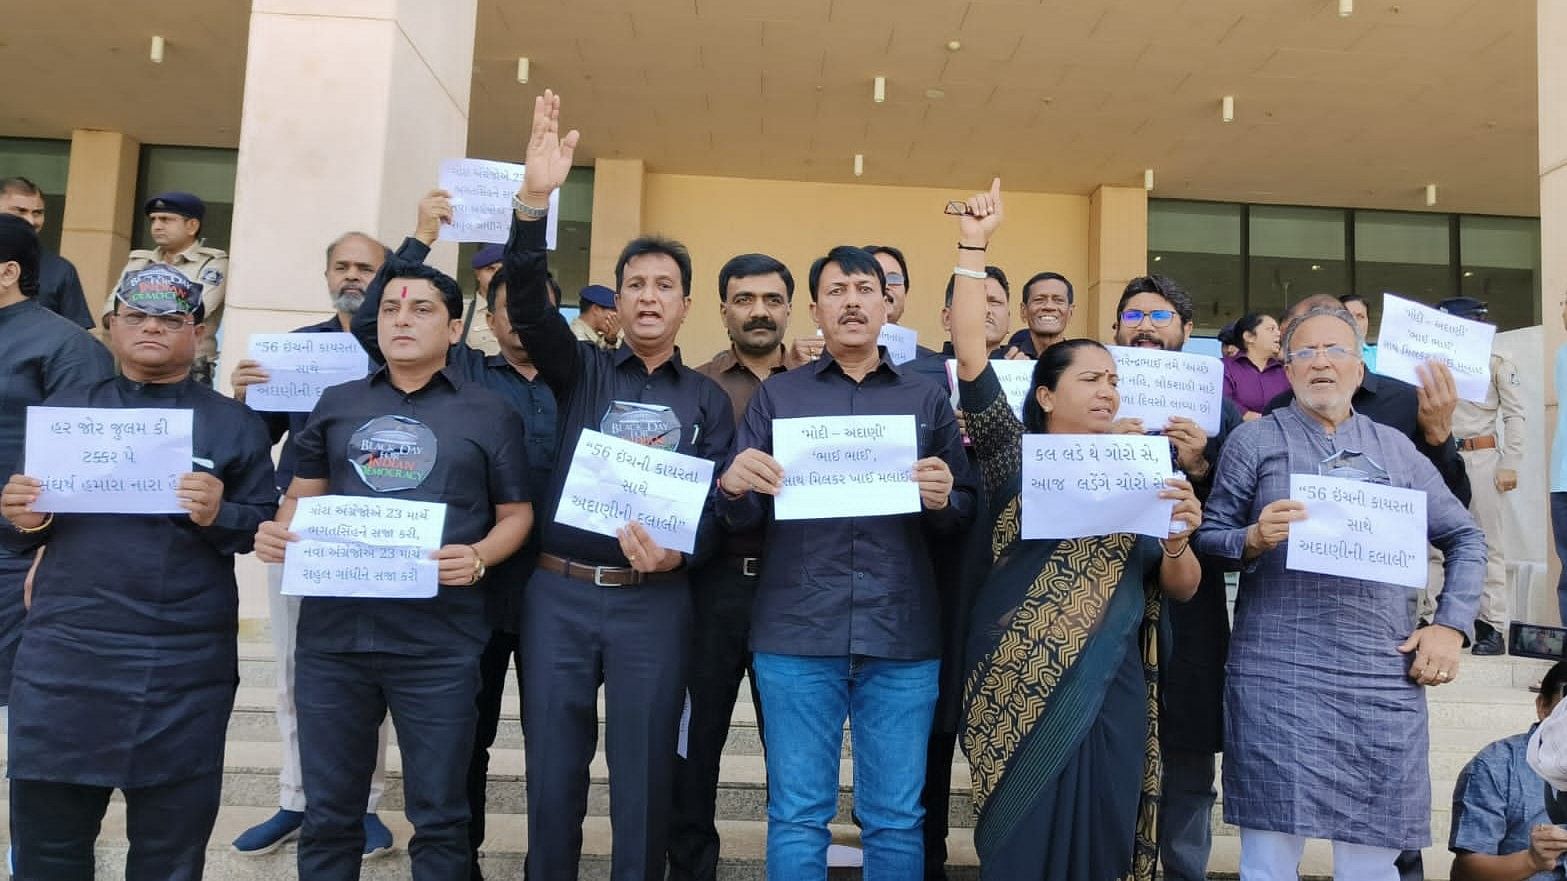 On Monday, all MLAs of Congress entered the Gujarat Assembly wearing black clothes as a mark of protest against Gandhi's disqualification. Credit: Special Arrangement